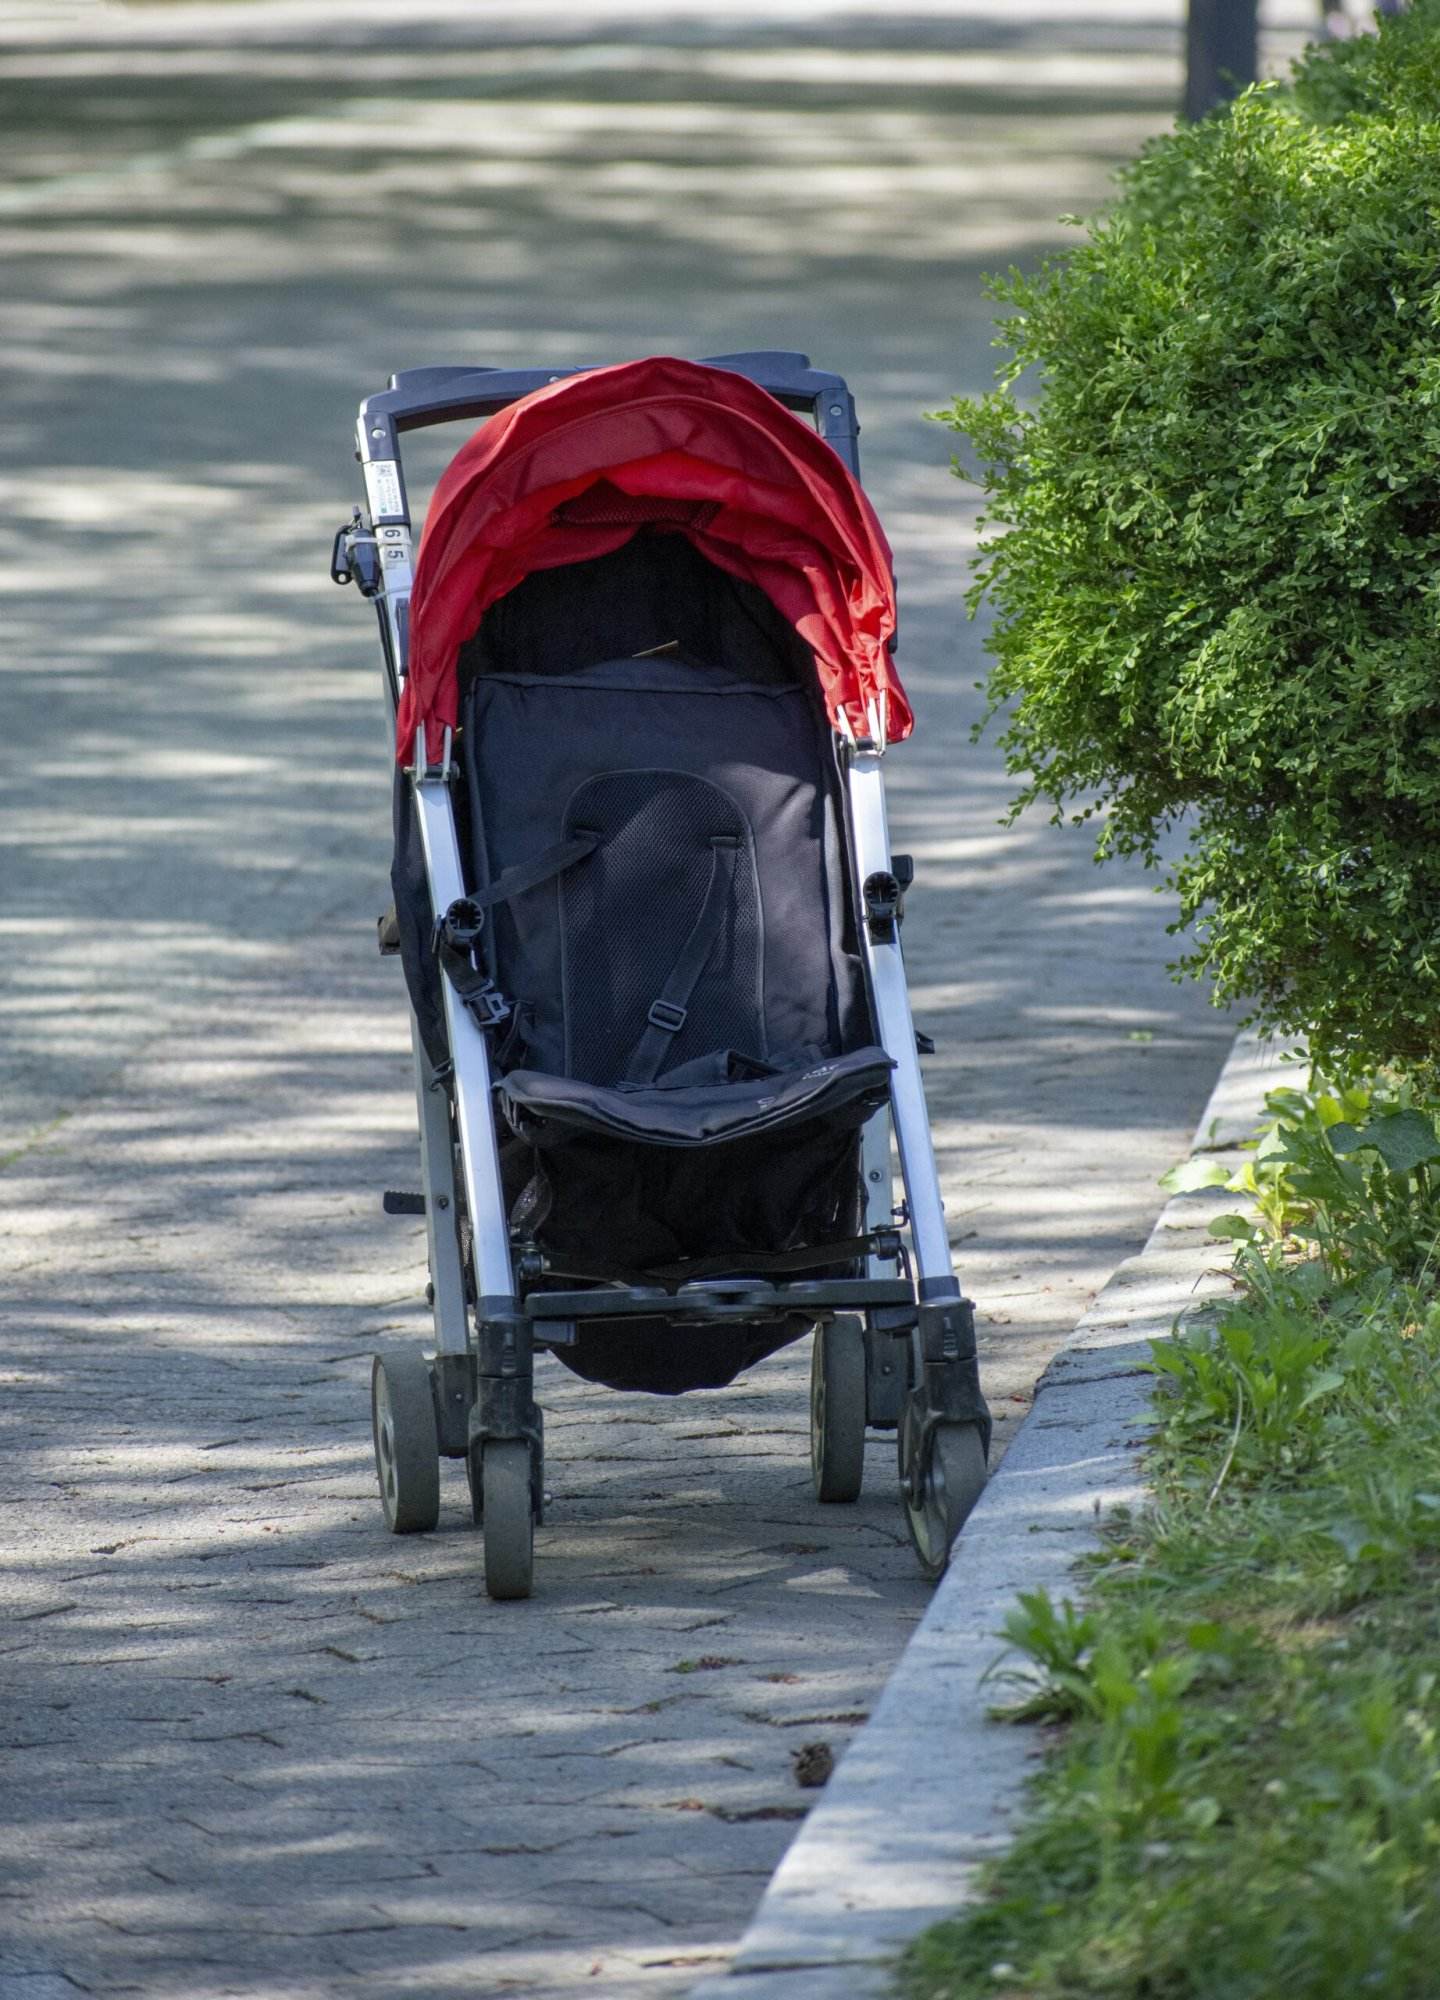 When Can Babies Go In A Stroller Without A Car Seat?